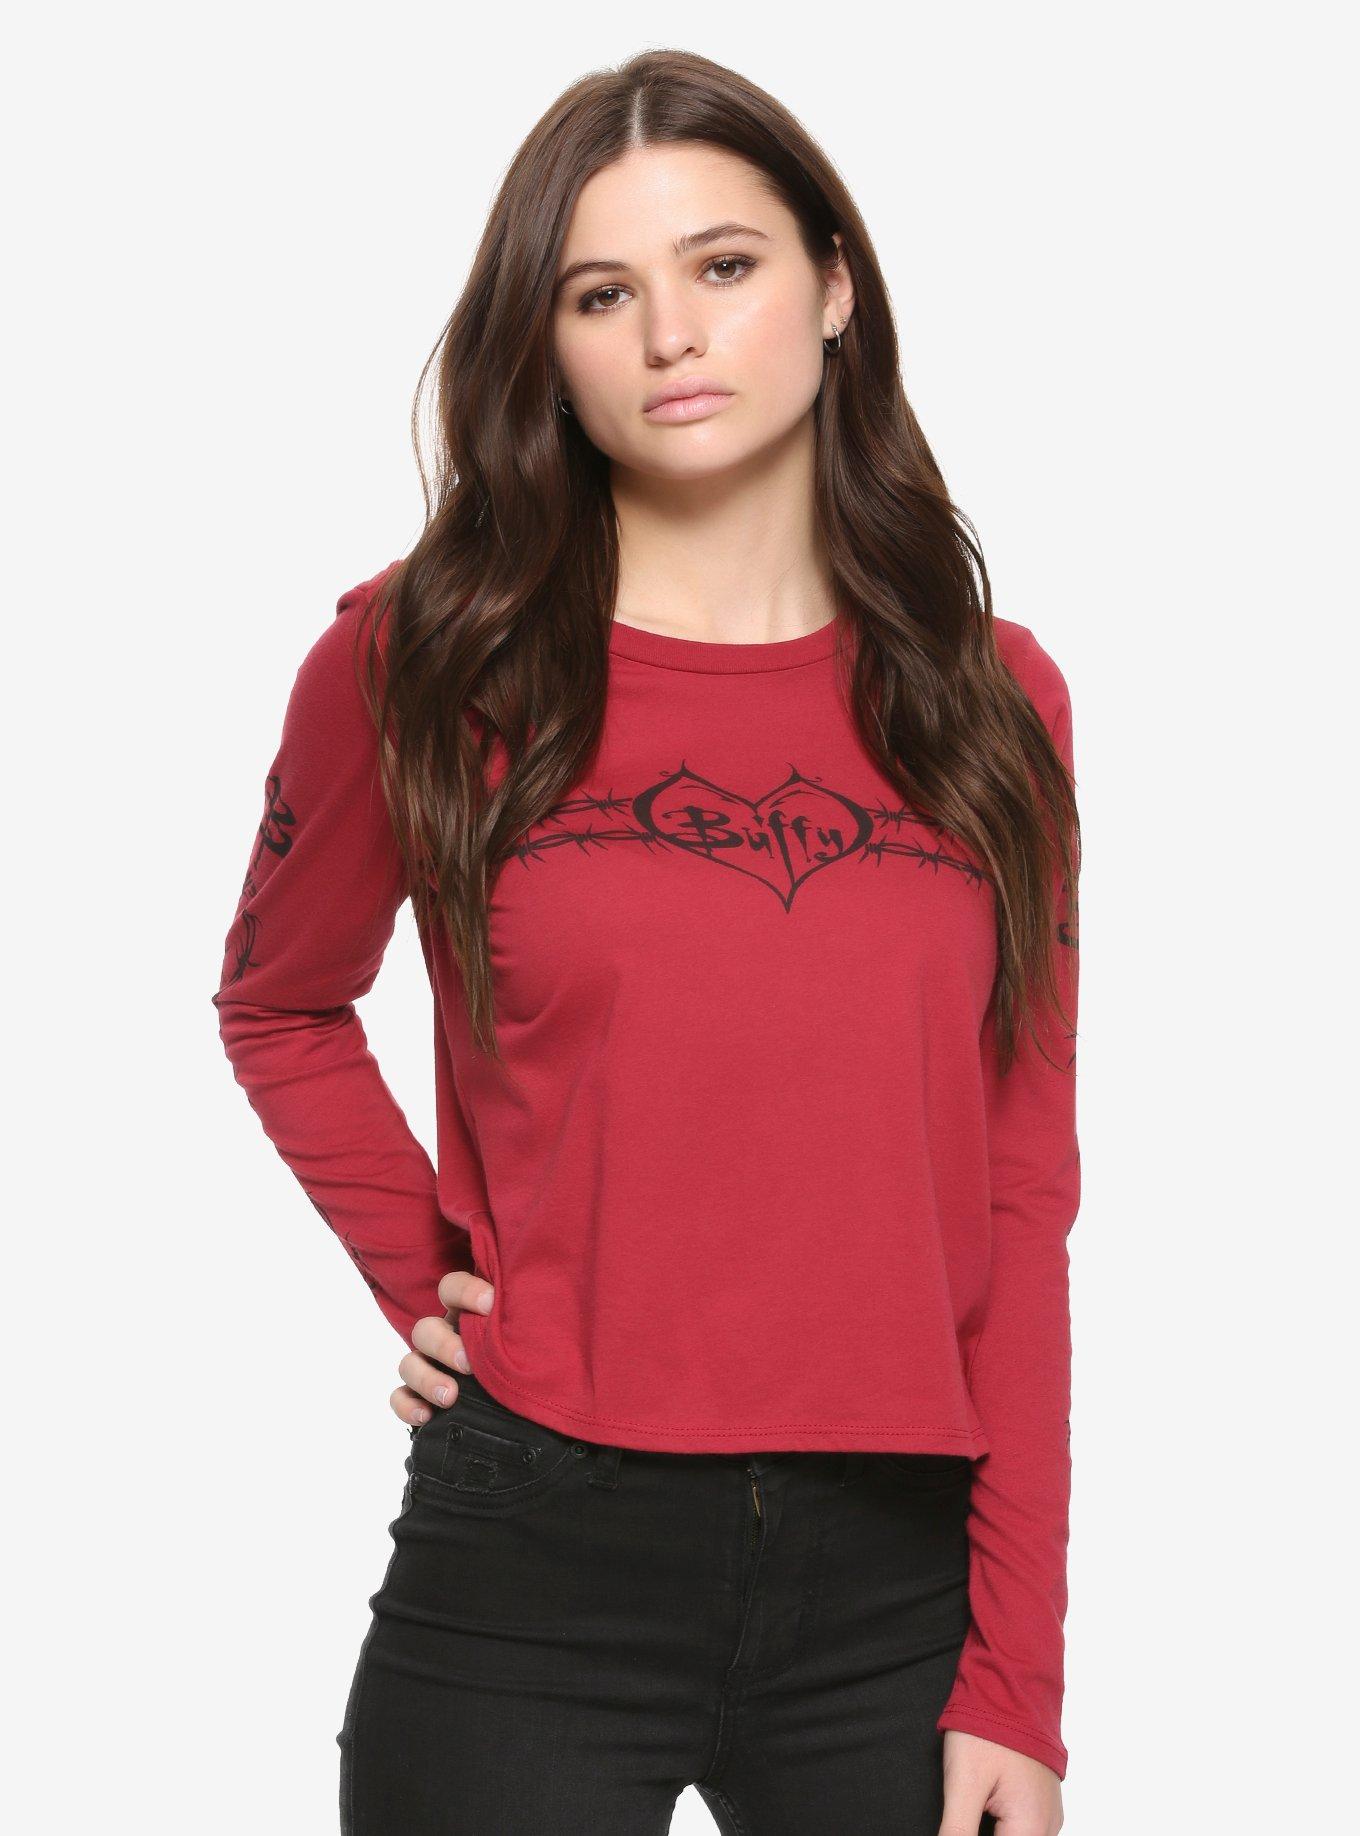 Buffy The Vampire Slayer Barbed Wire Girls Long-Sleeve T-Shirt | Hot Topic